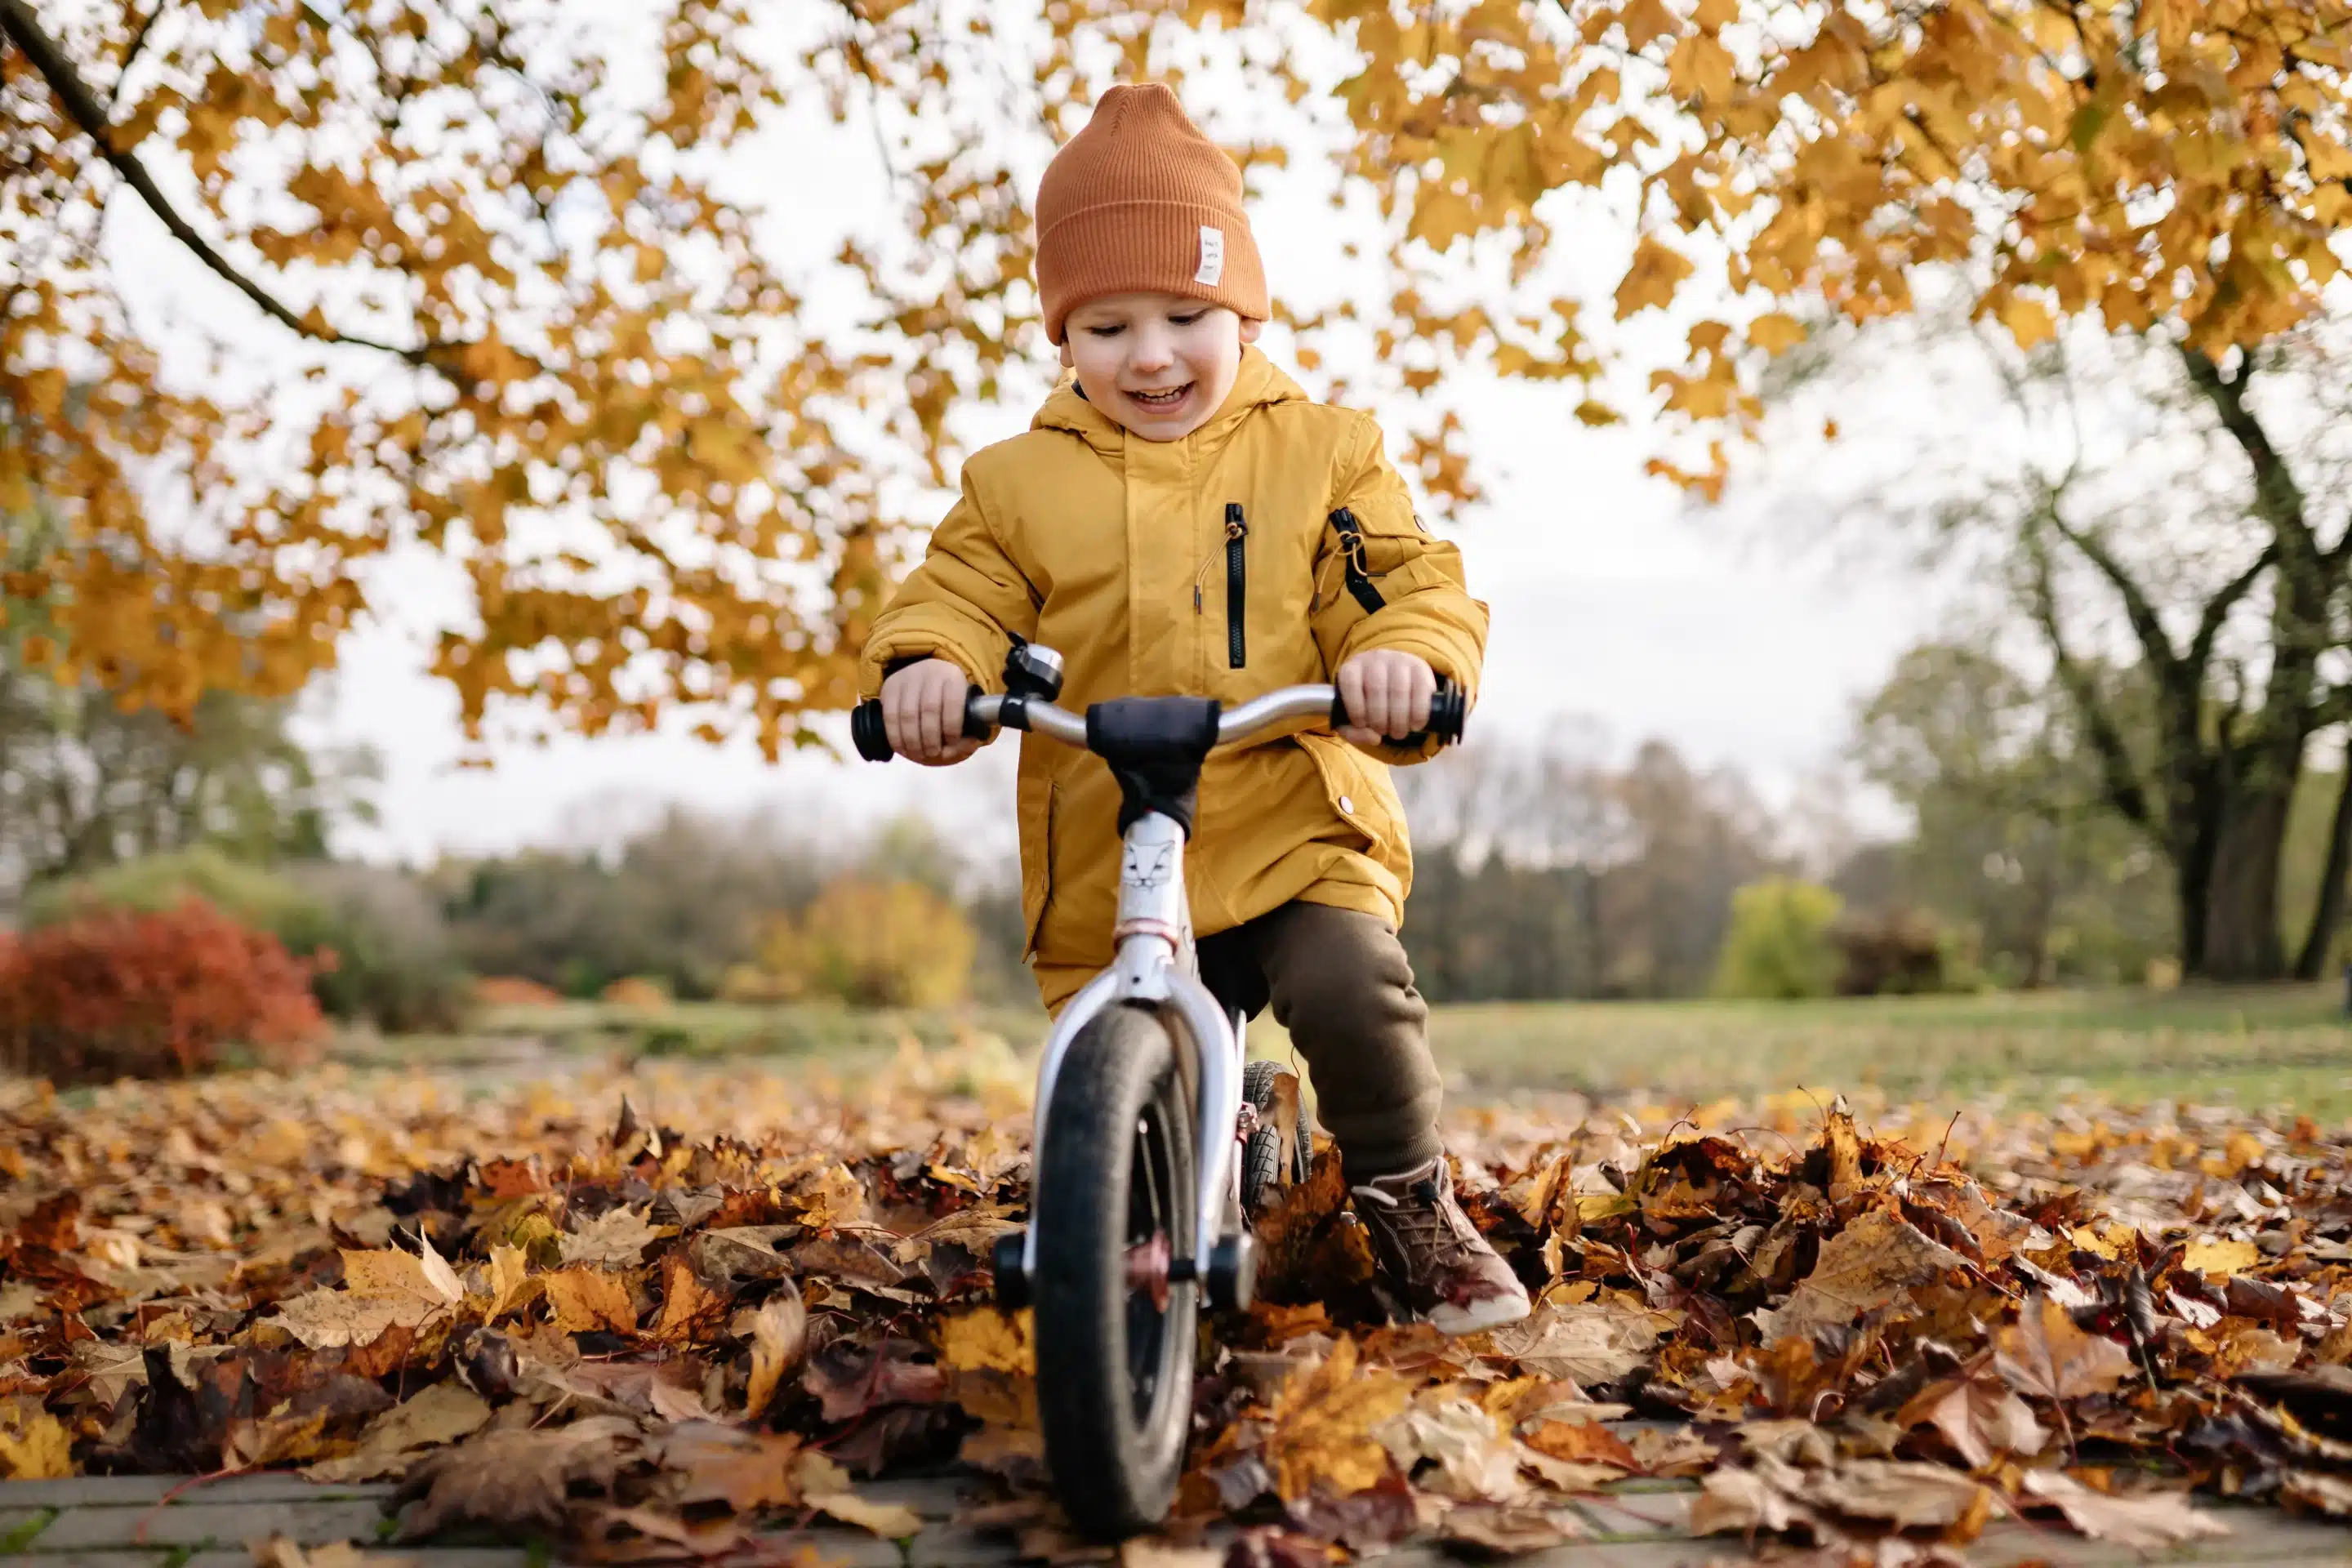 Our young adventurer bravely takes to the forest paths of the Eure, near Vernon, on his draisienne, amid the magnificent autumn colors. Every falling leaf is a new discovery, every sound in the forest an adventure in itself. A moment of pure, innocent exploration for our toddler.